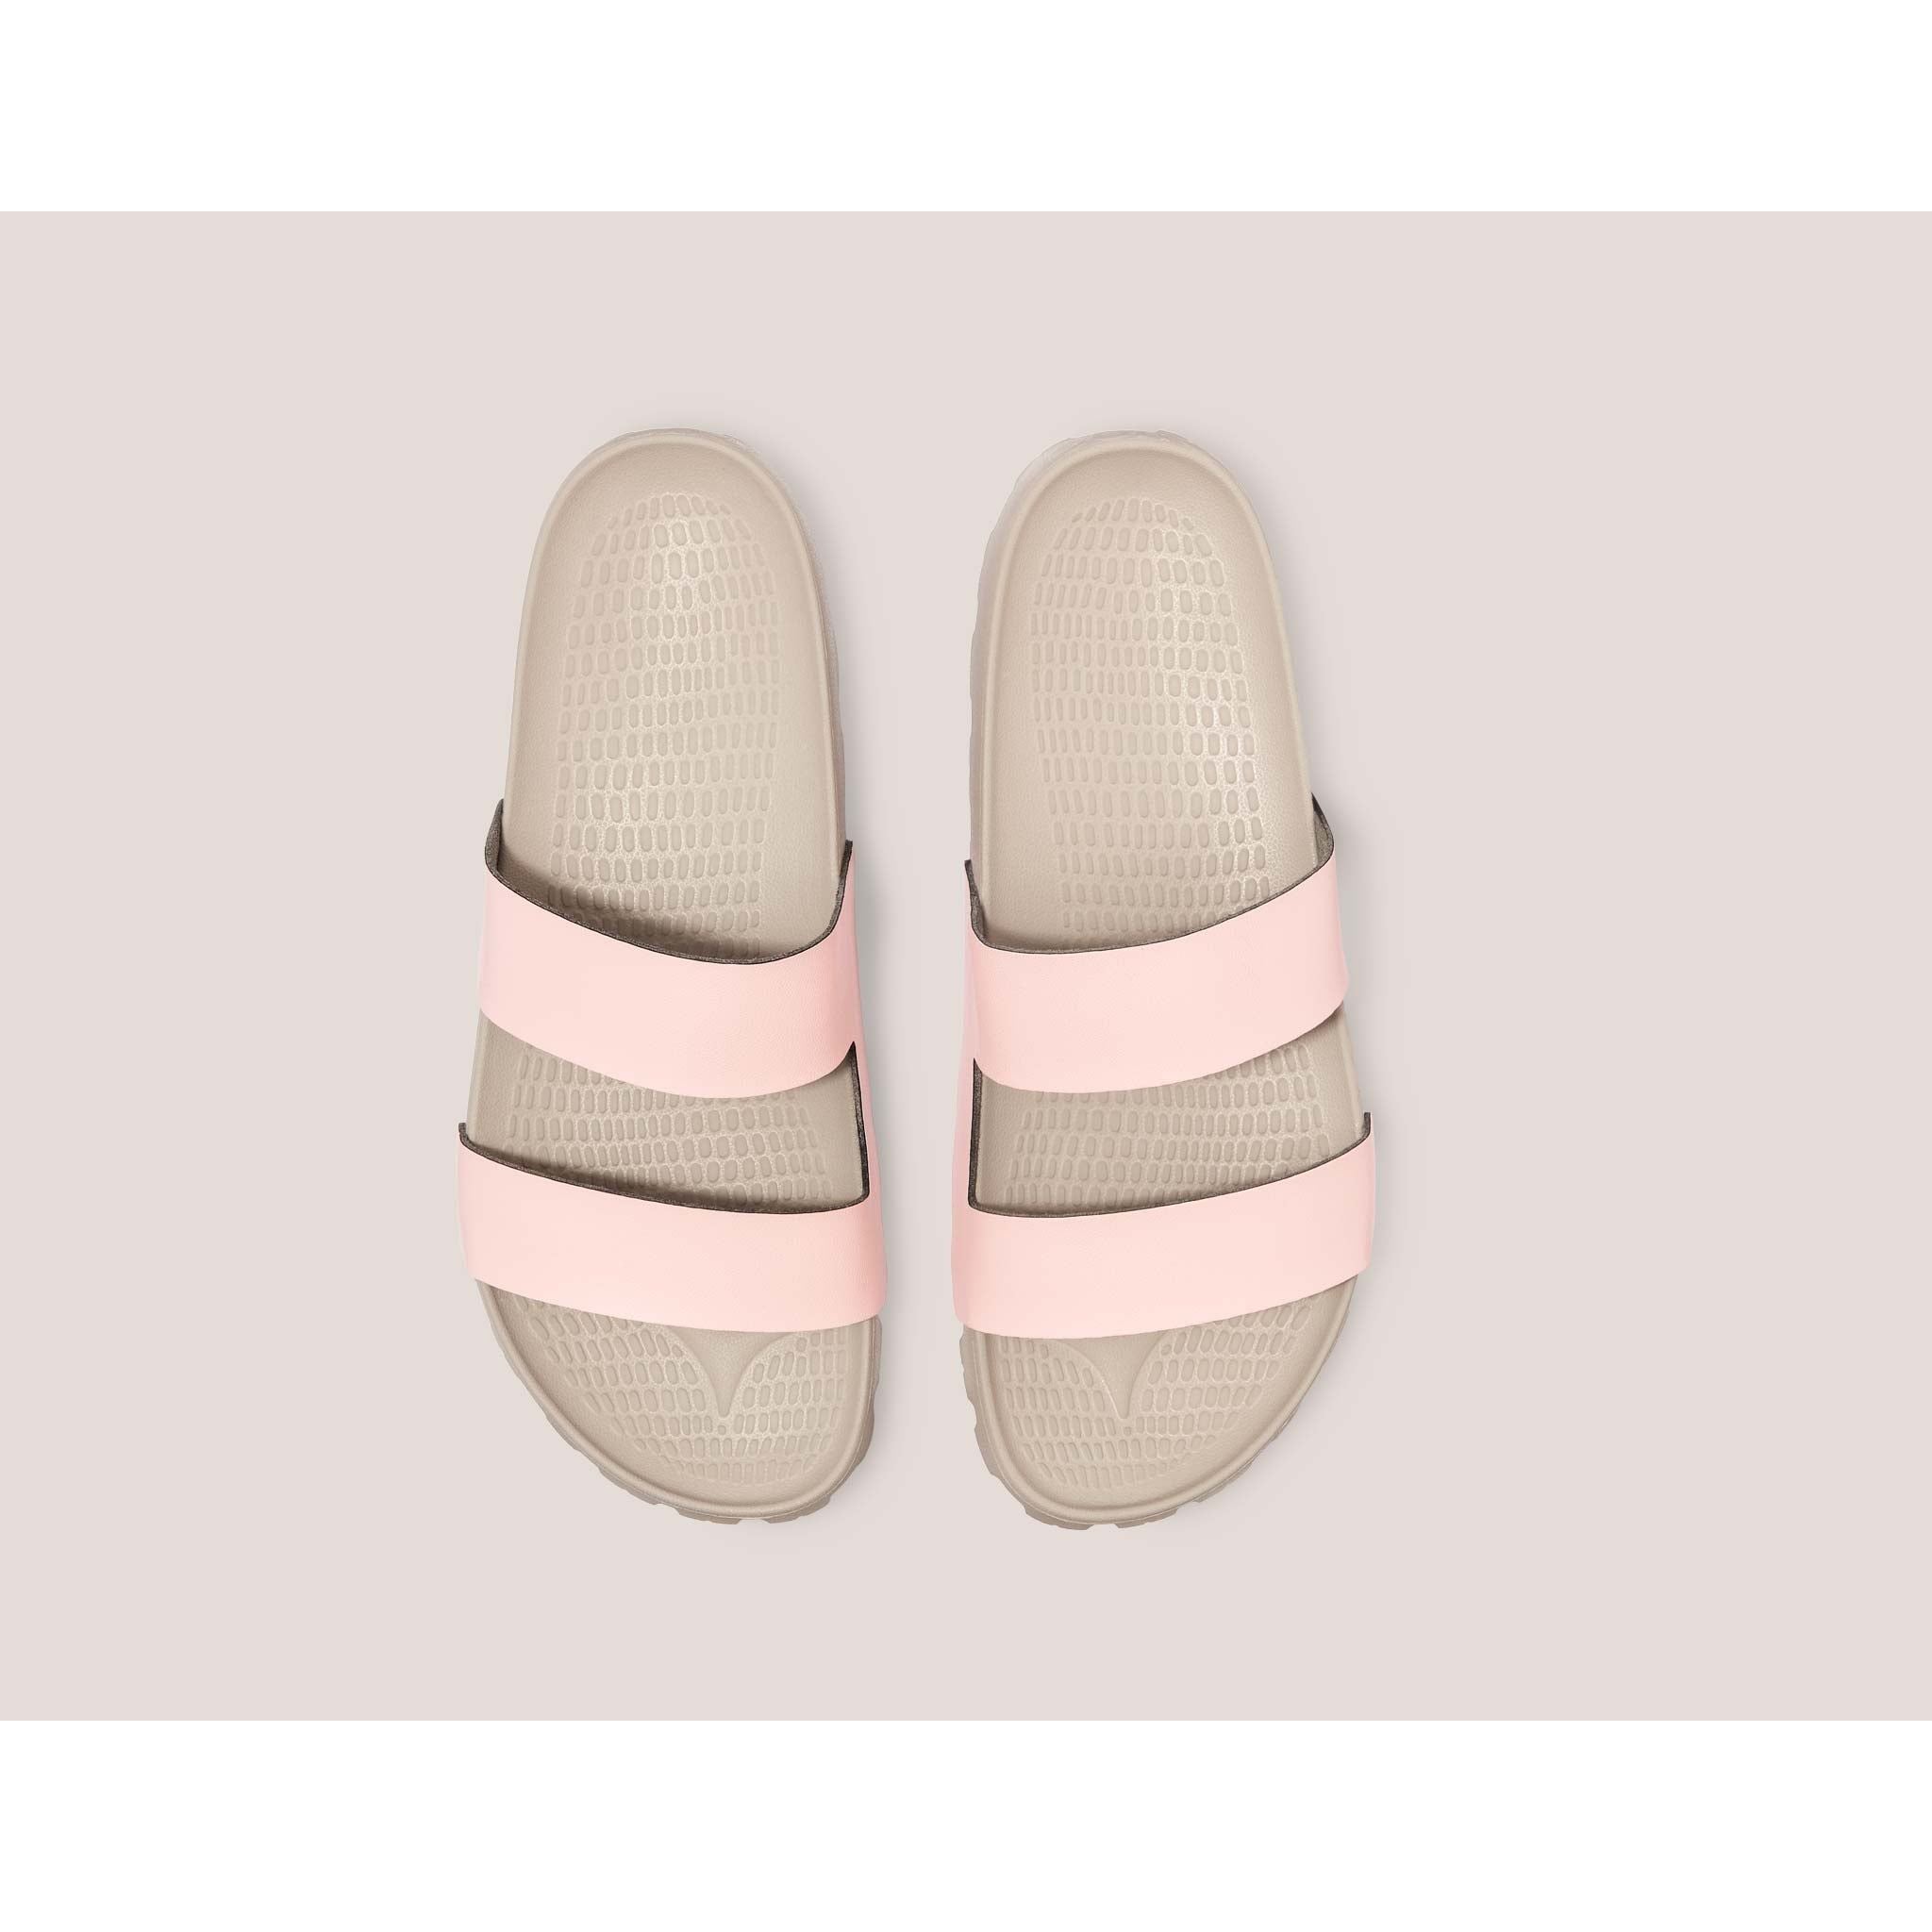 QUOC LALA SLIDE - DUSTY PINK